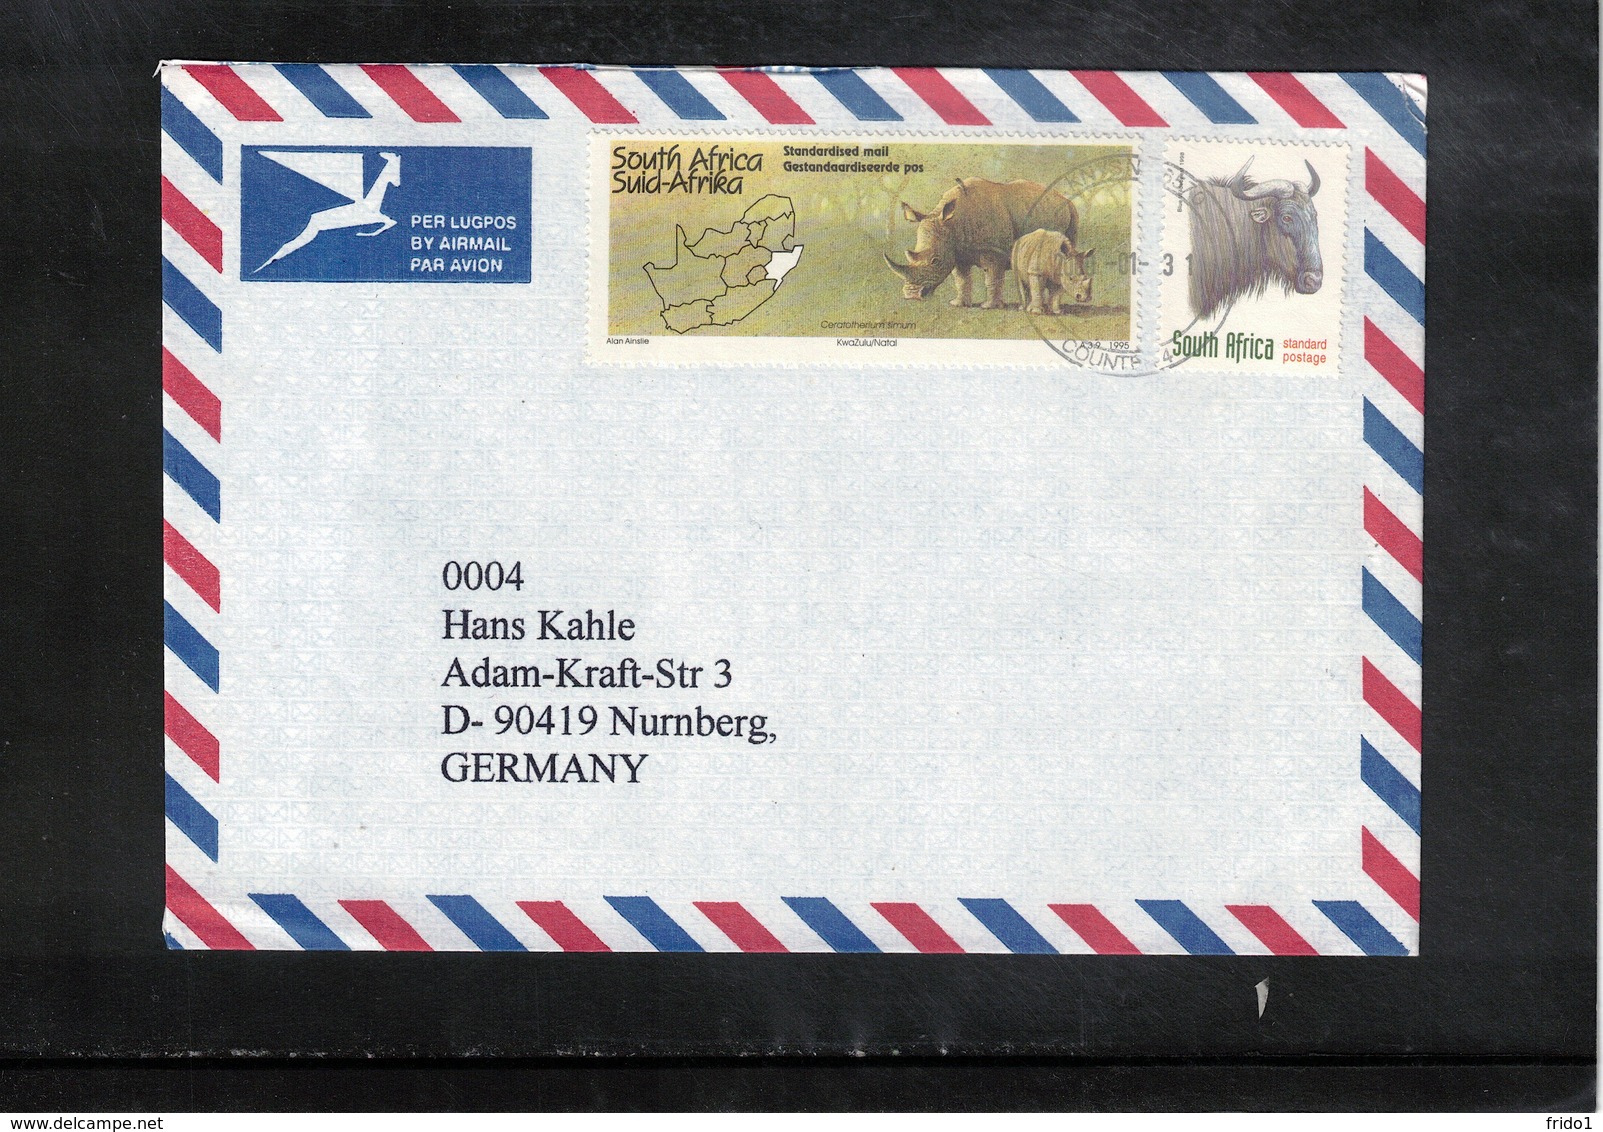 South Africa 2000 Interesting Airmail Letter - Covers & Documents